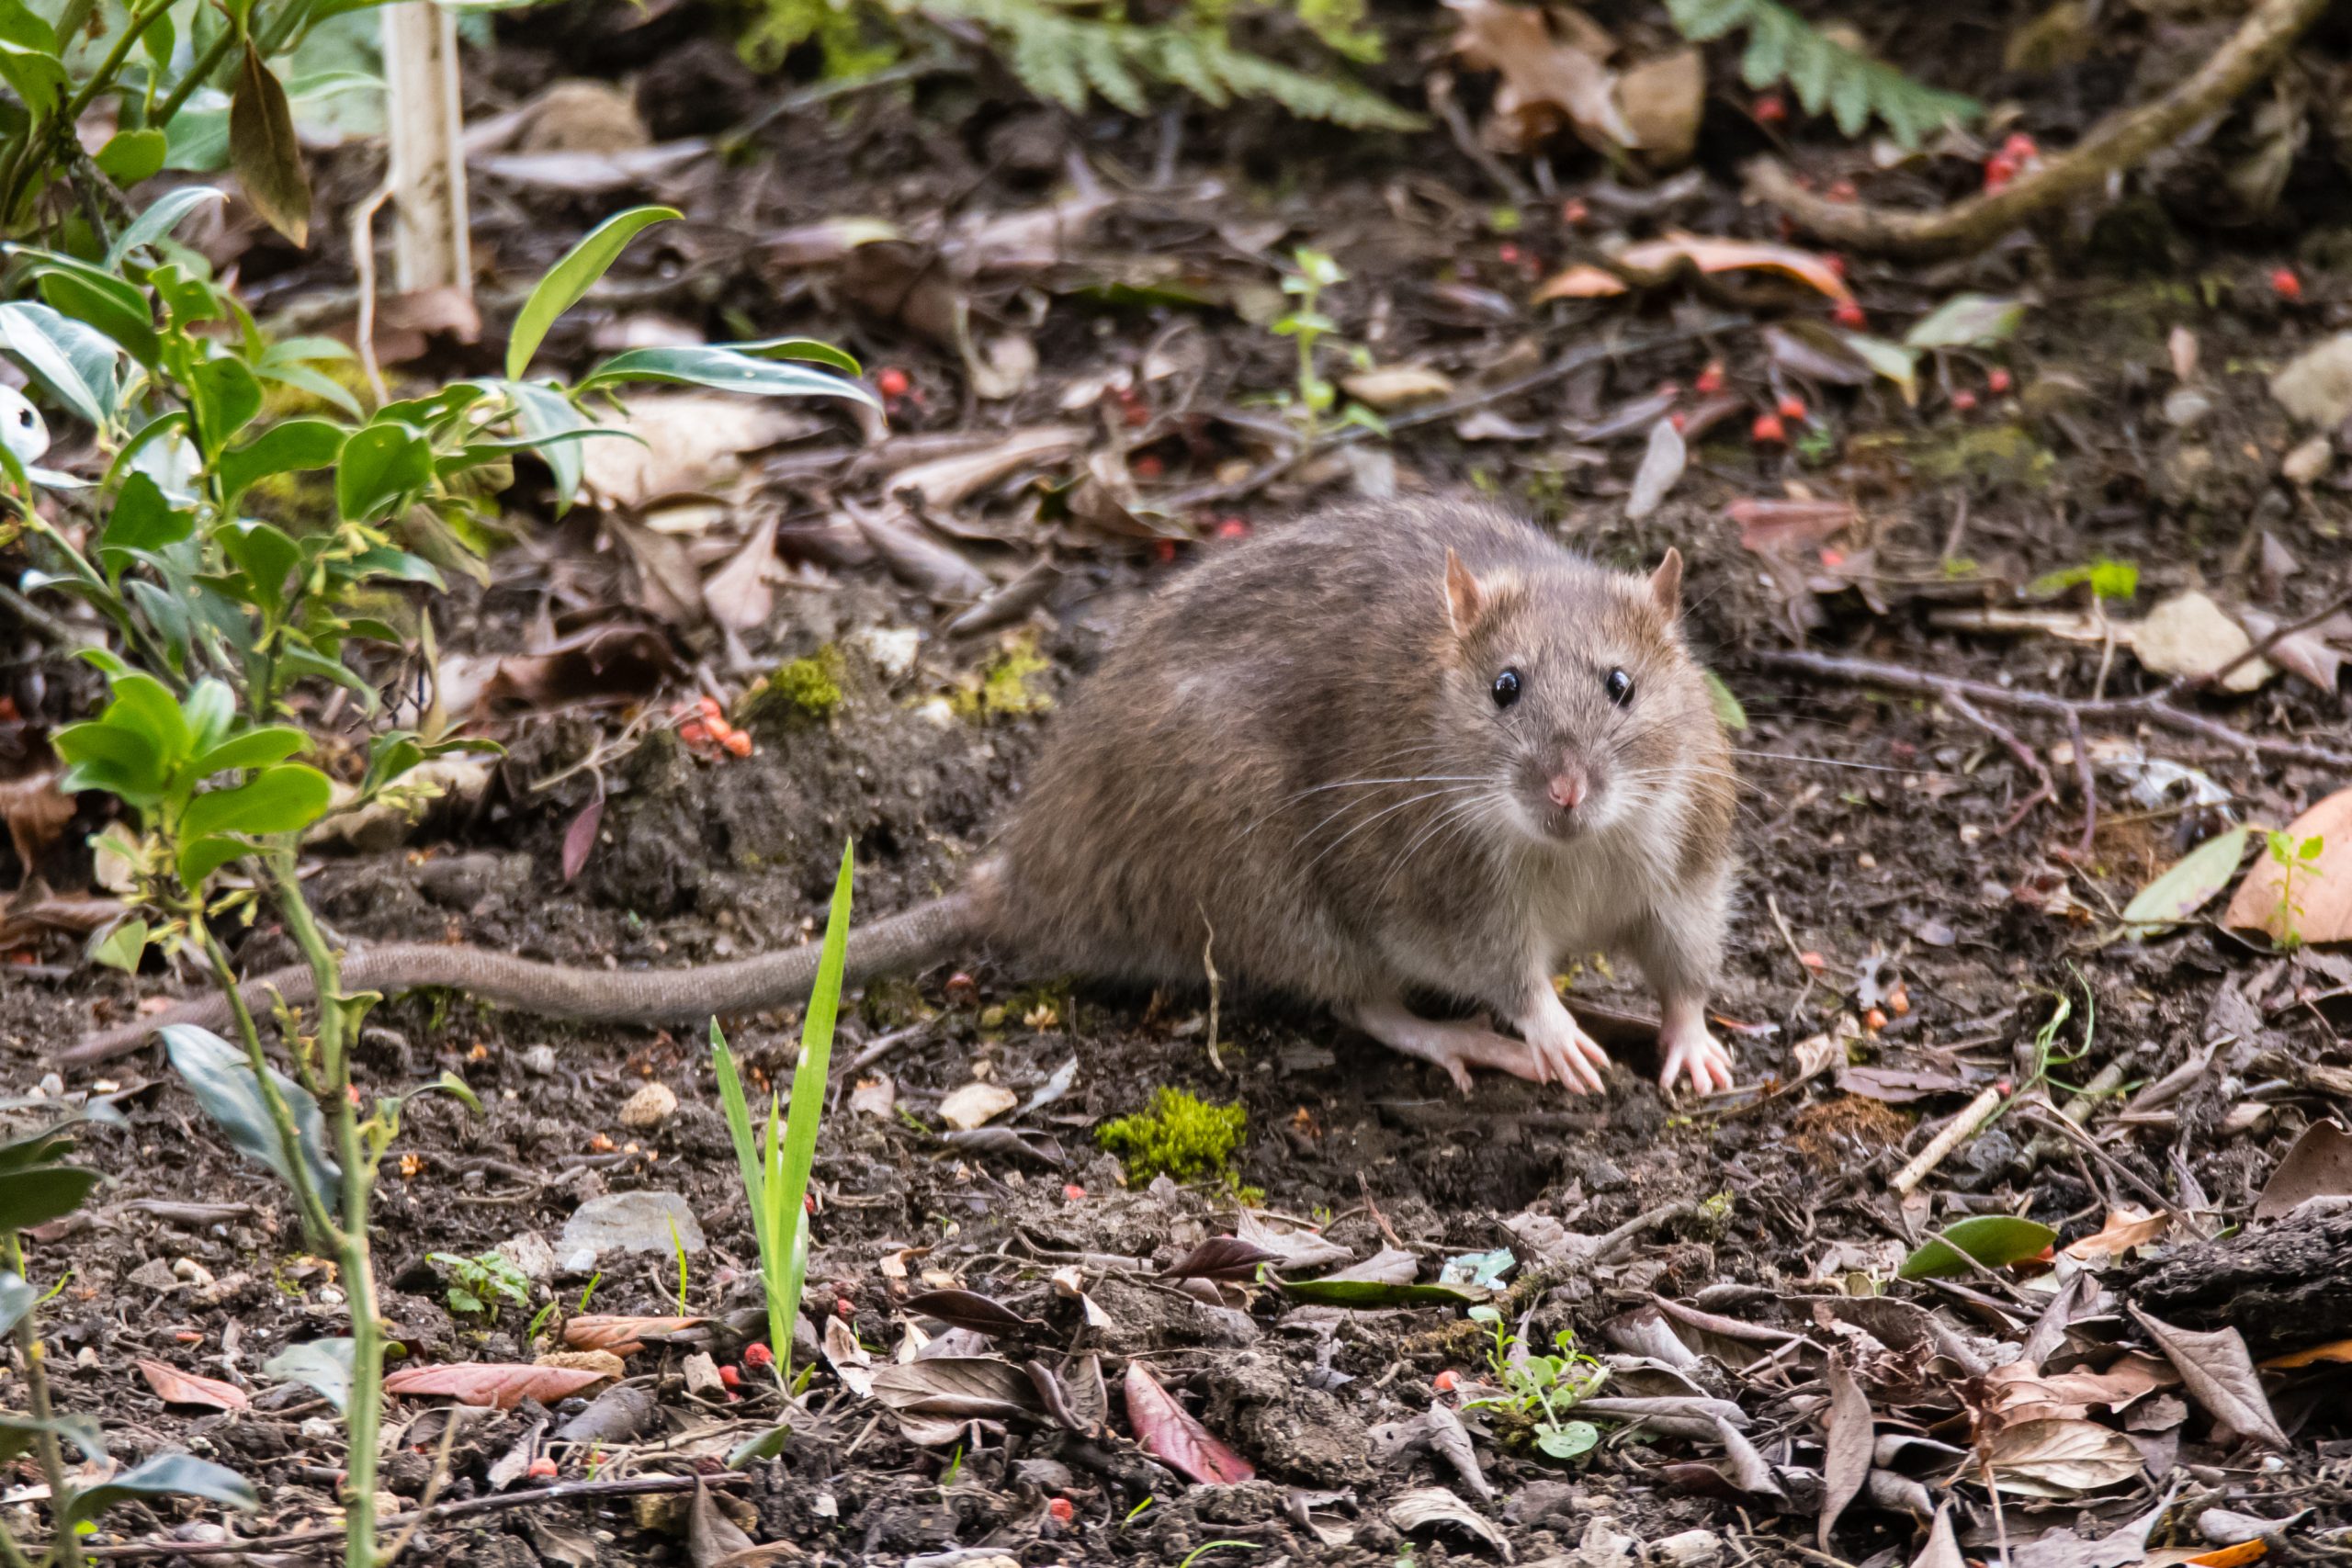 The three rules you need to live by unless you want rats taking over your home, according to a garden pest expert